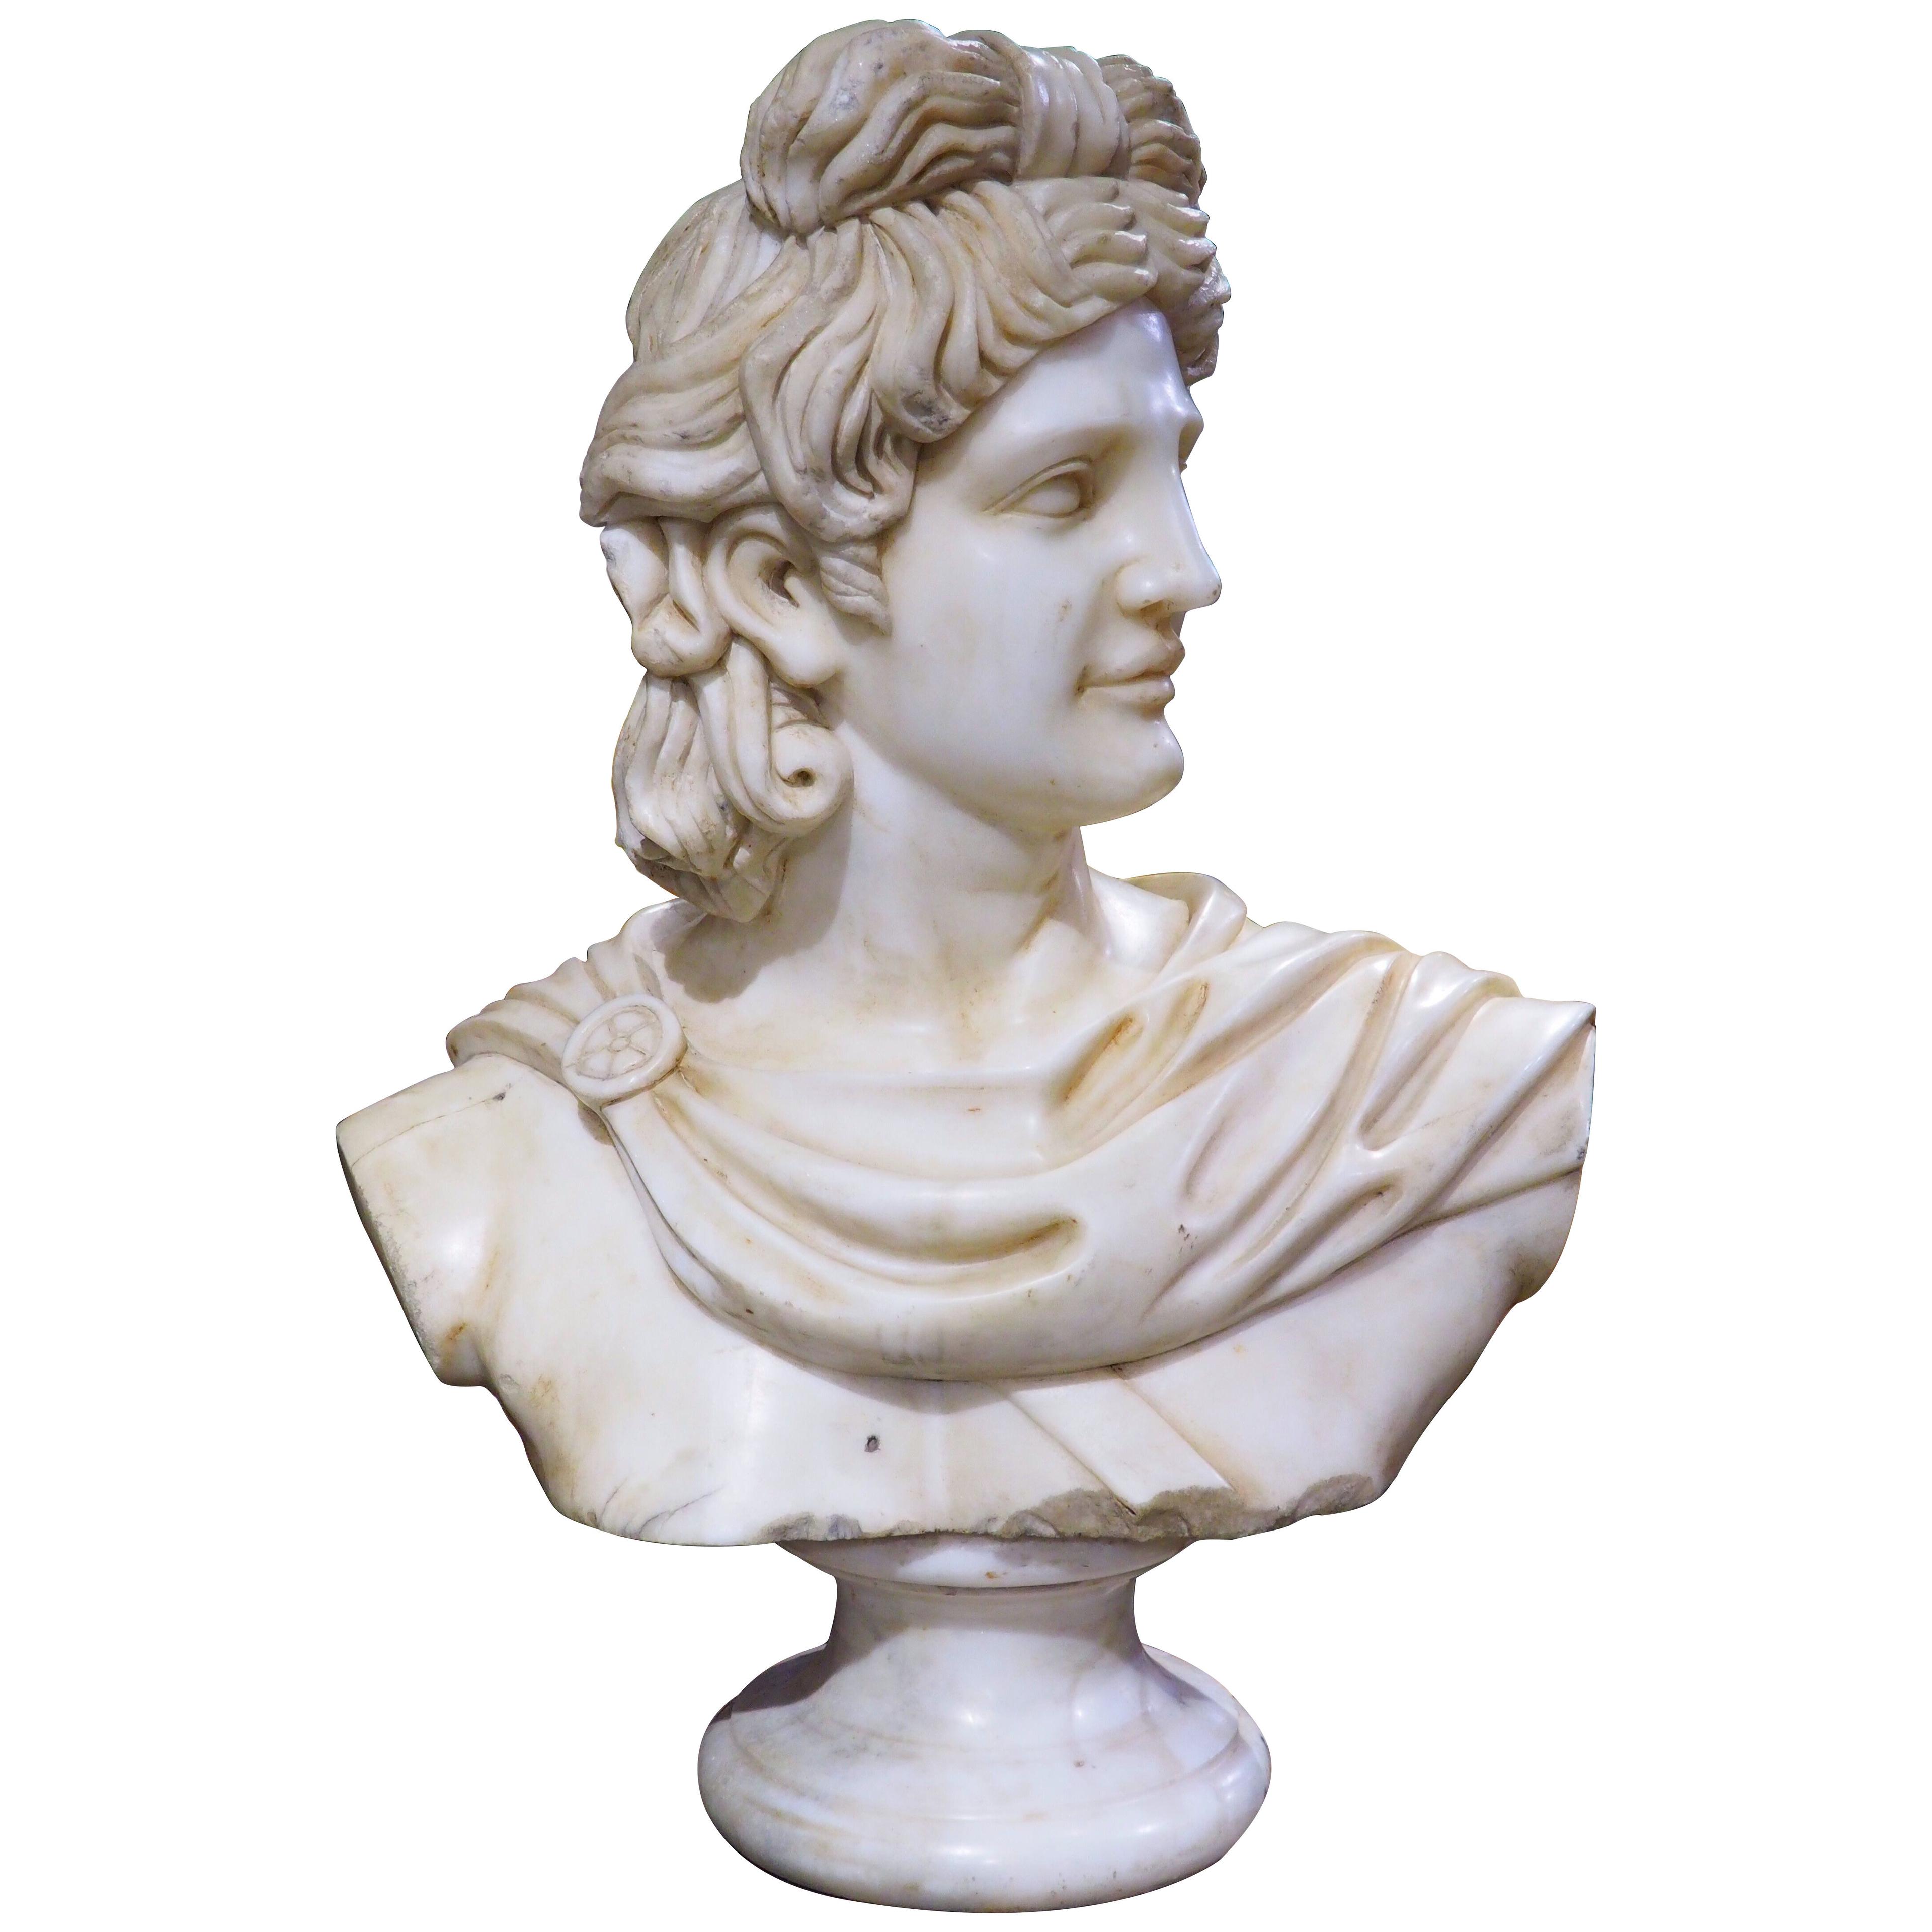 Antique Italian Carved Marble Bust of Apollo Belvedere, 19th Century